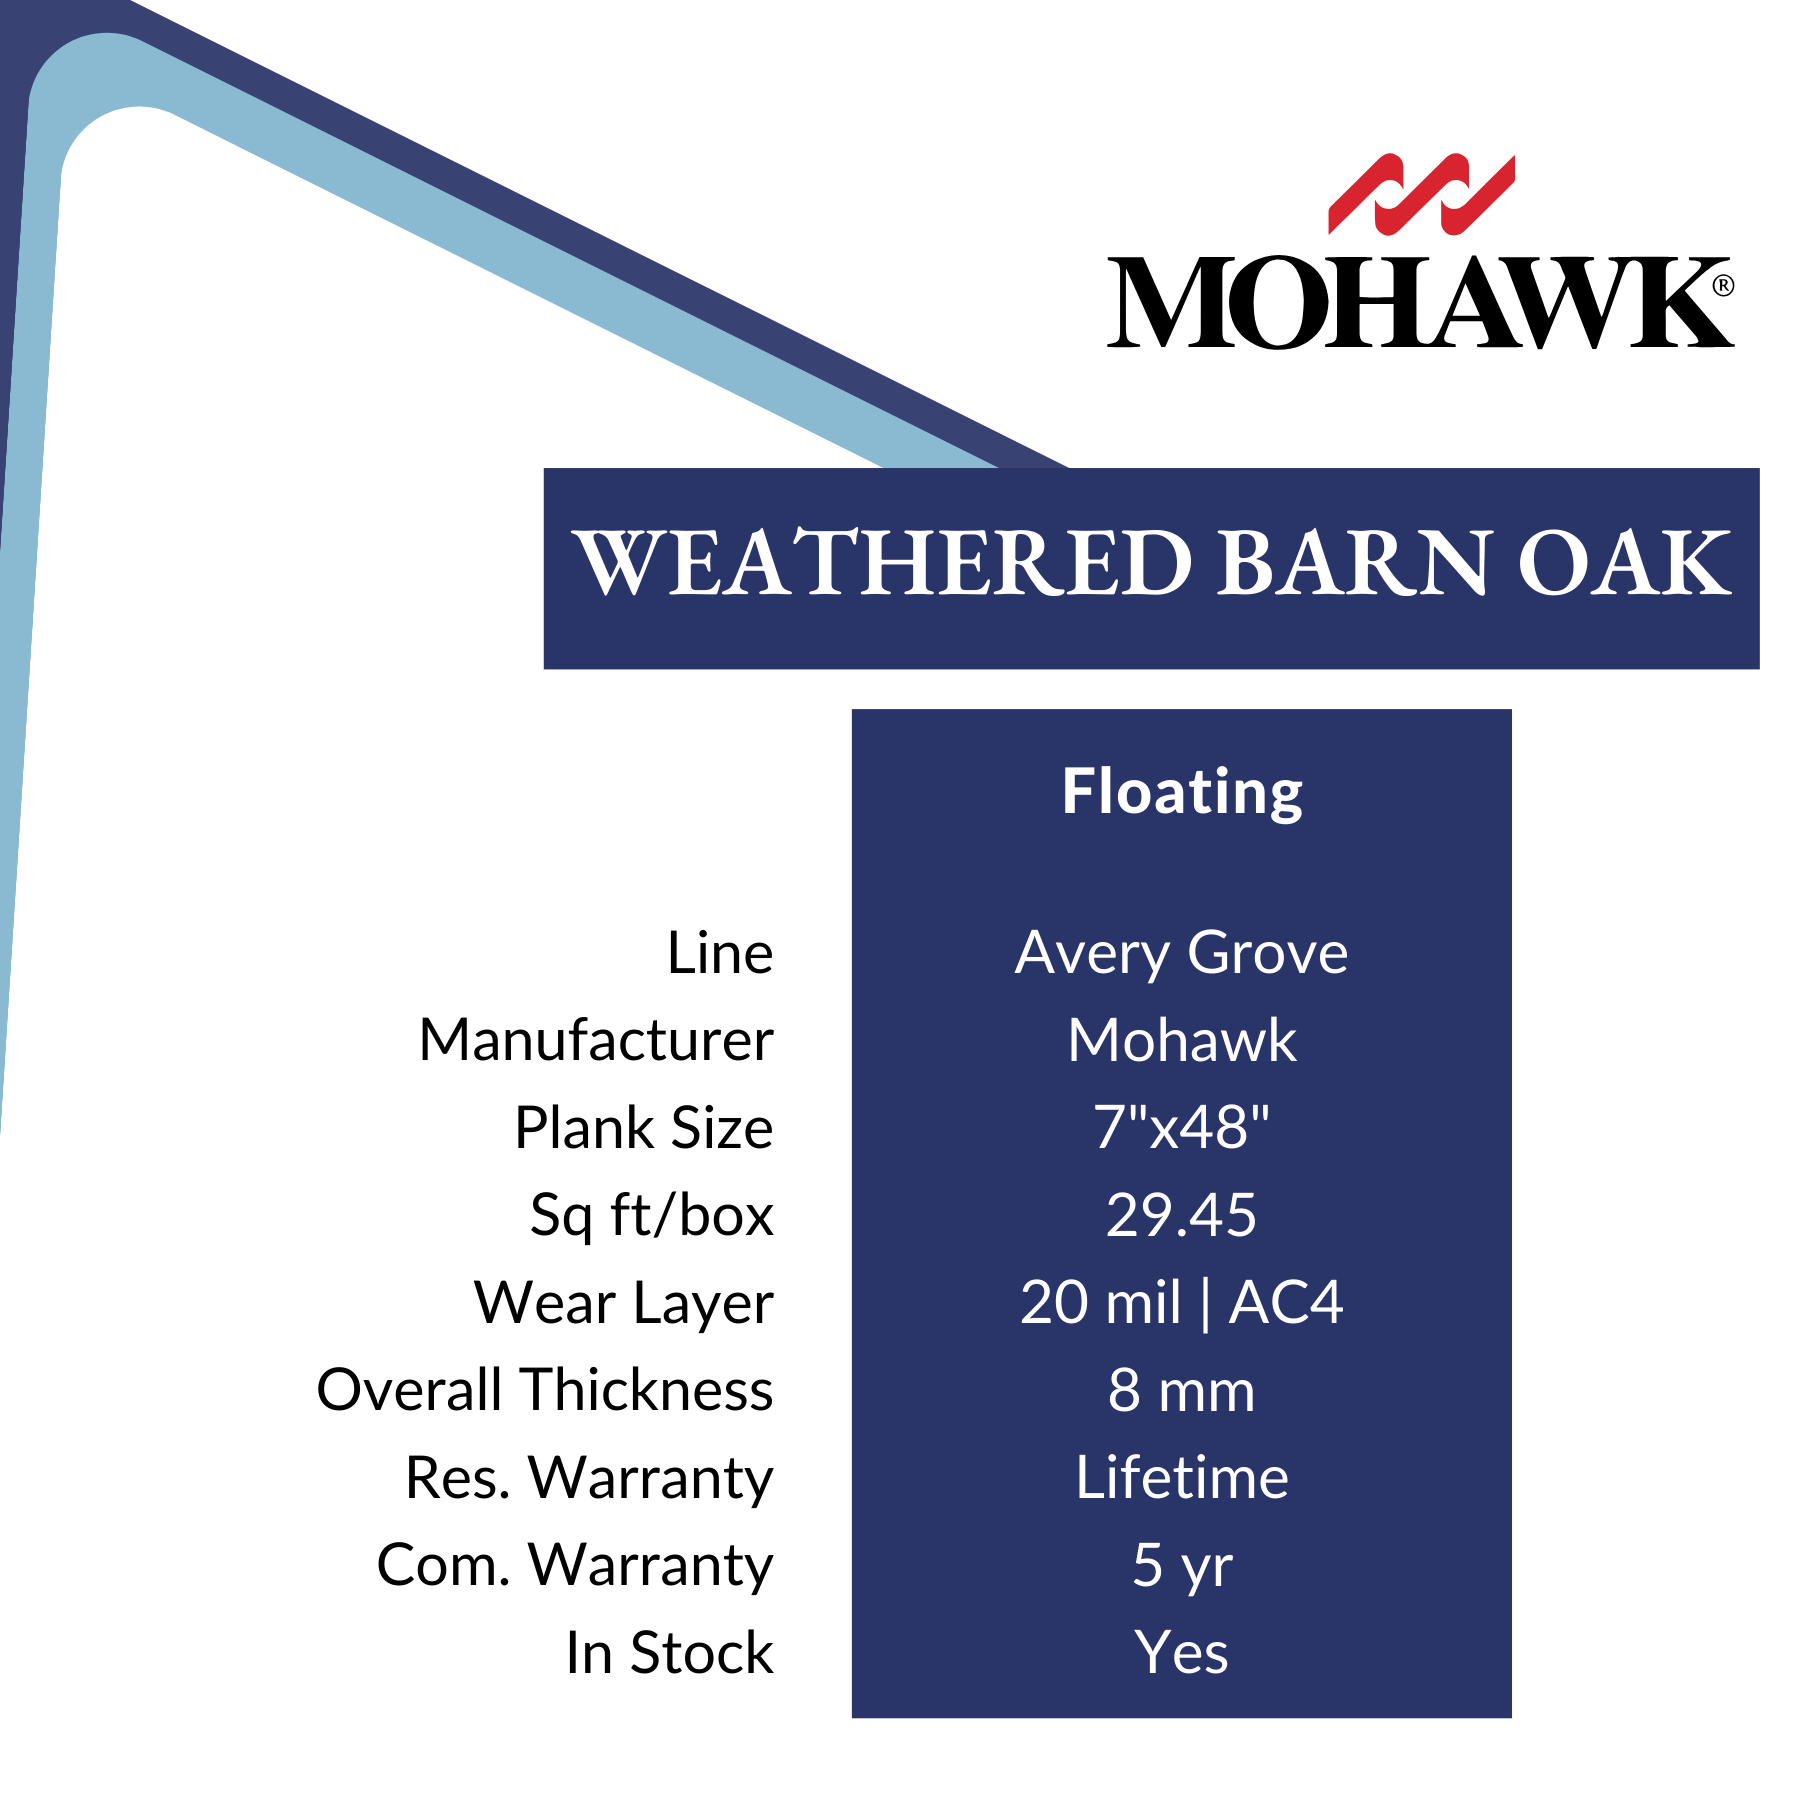 Weathered Barn Oak by Mohawk, sold by Calhoun's Flooring in Springfield, IL Specs